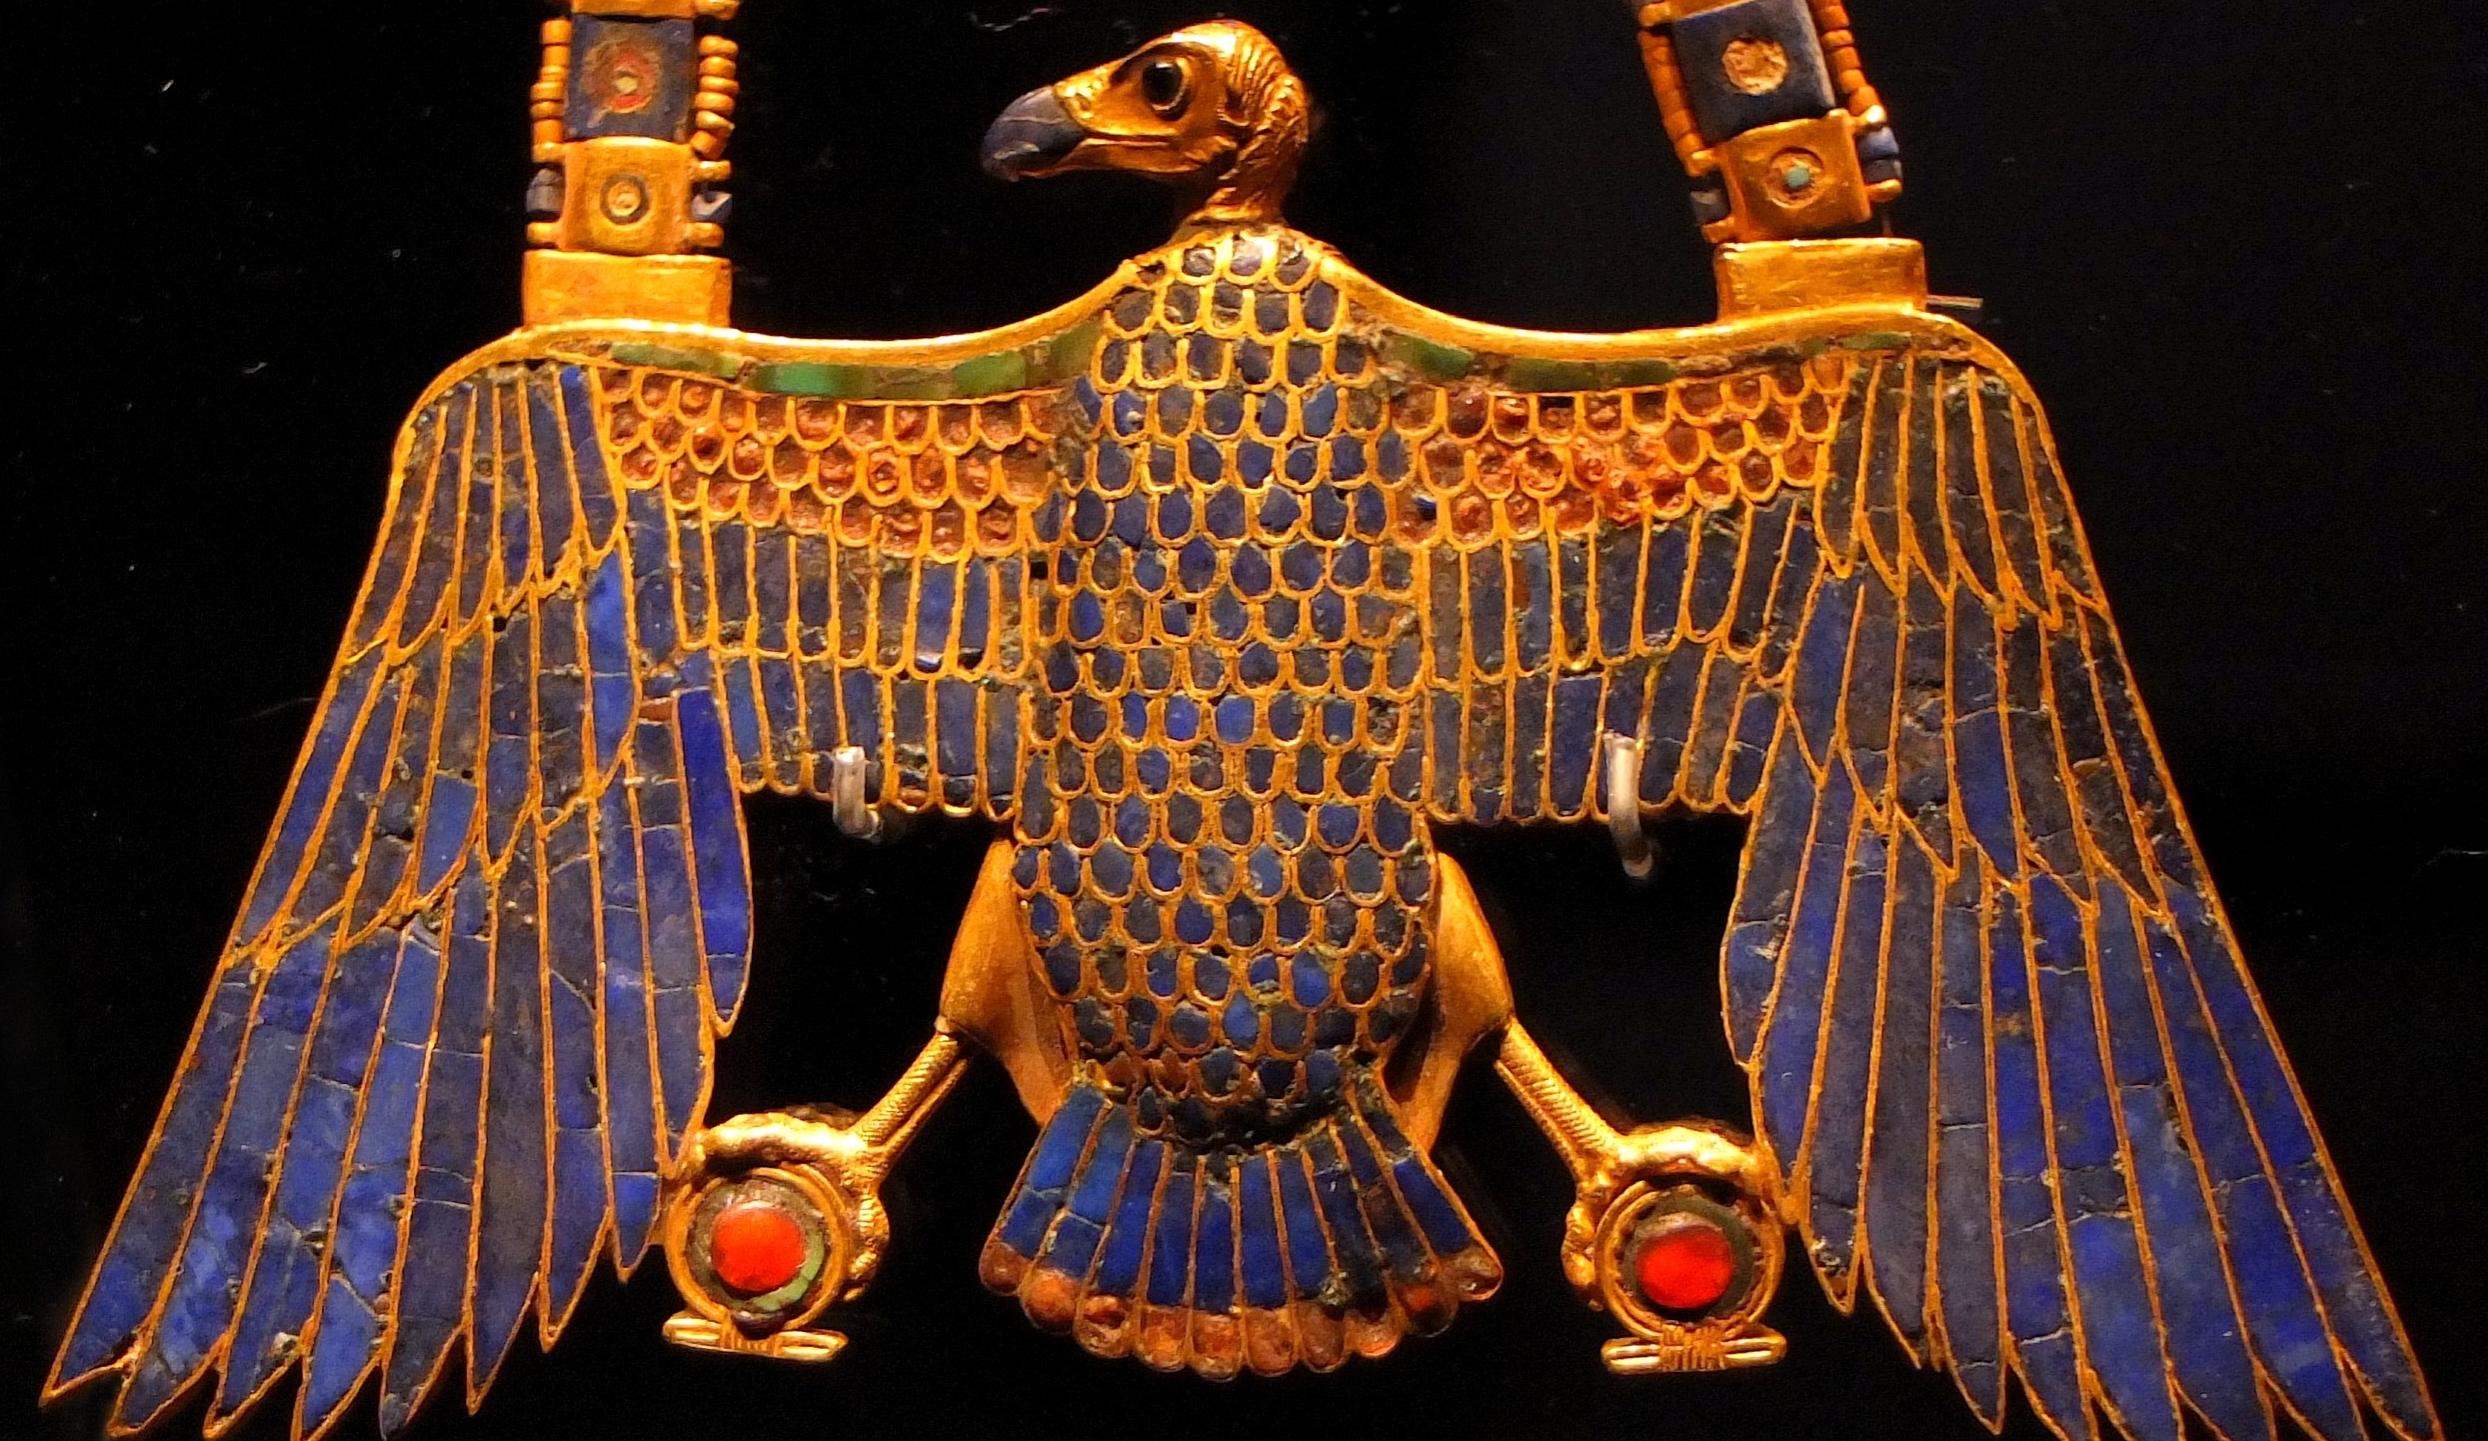  A golden amulet in the form of a vulture with outstretched wings, representing the ancient Egyptian goddess Nekhbet, who was associated with wealth and prosperity.